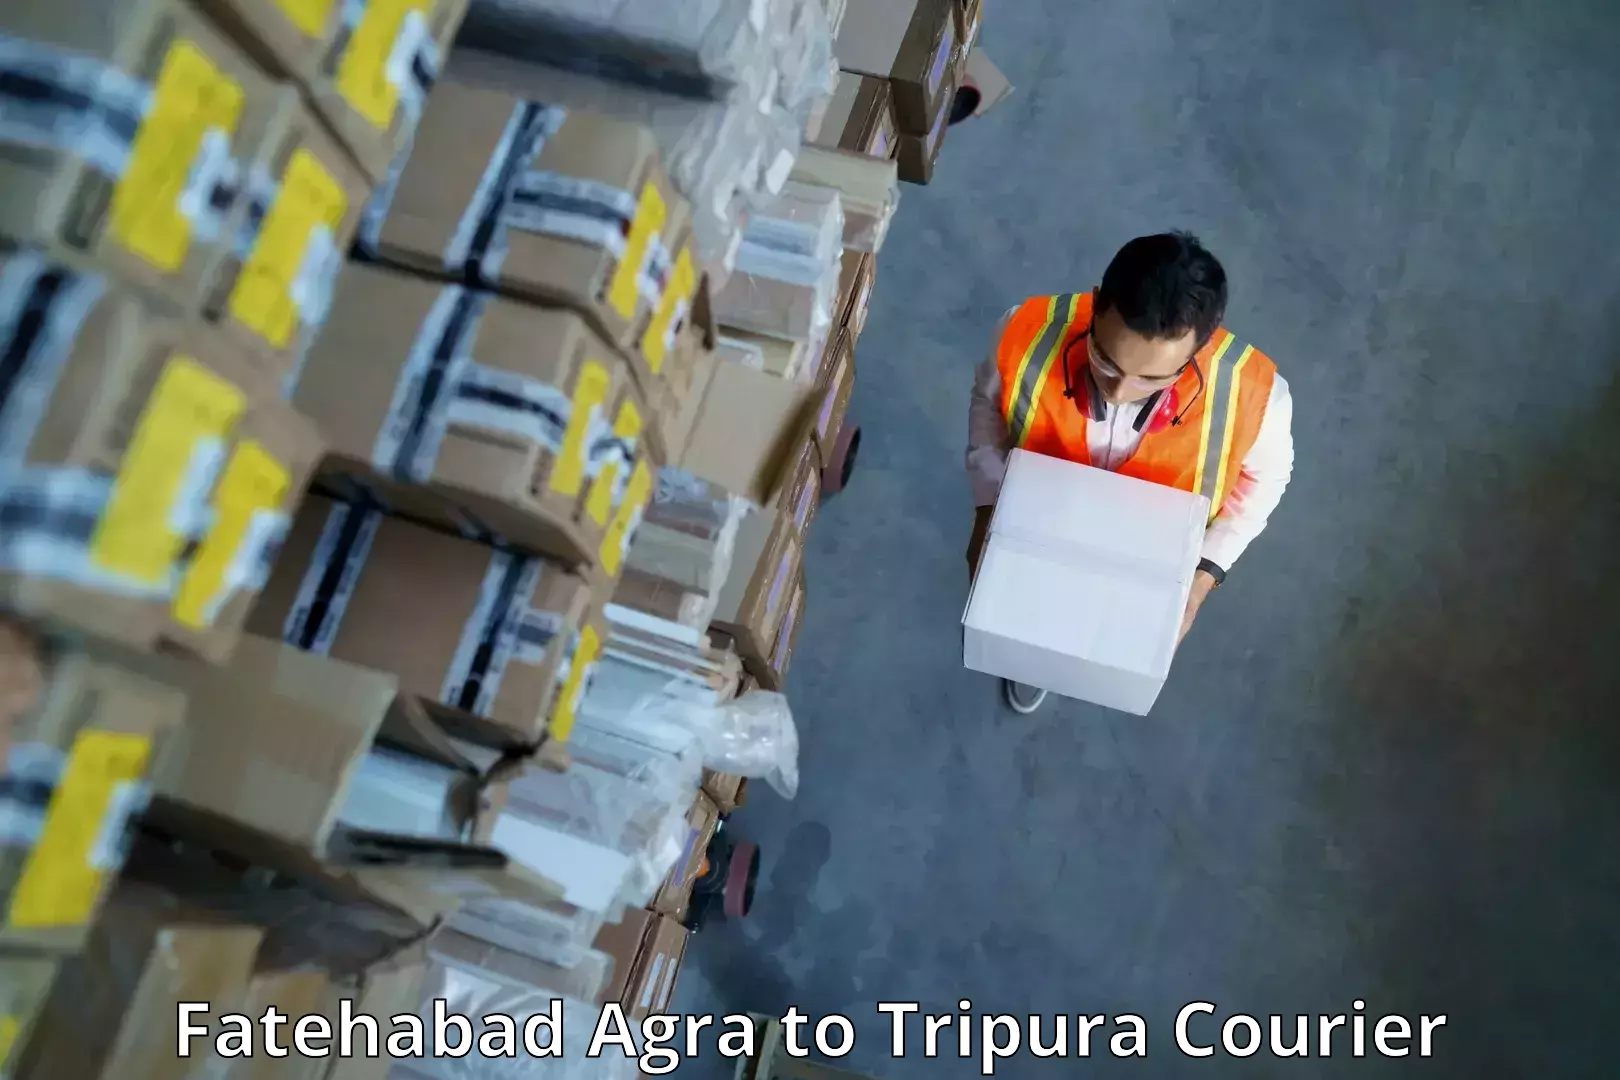 Specialized courier services Fatehabad Agra to Manu Bazar